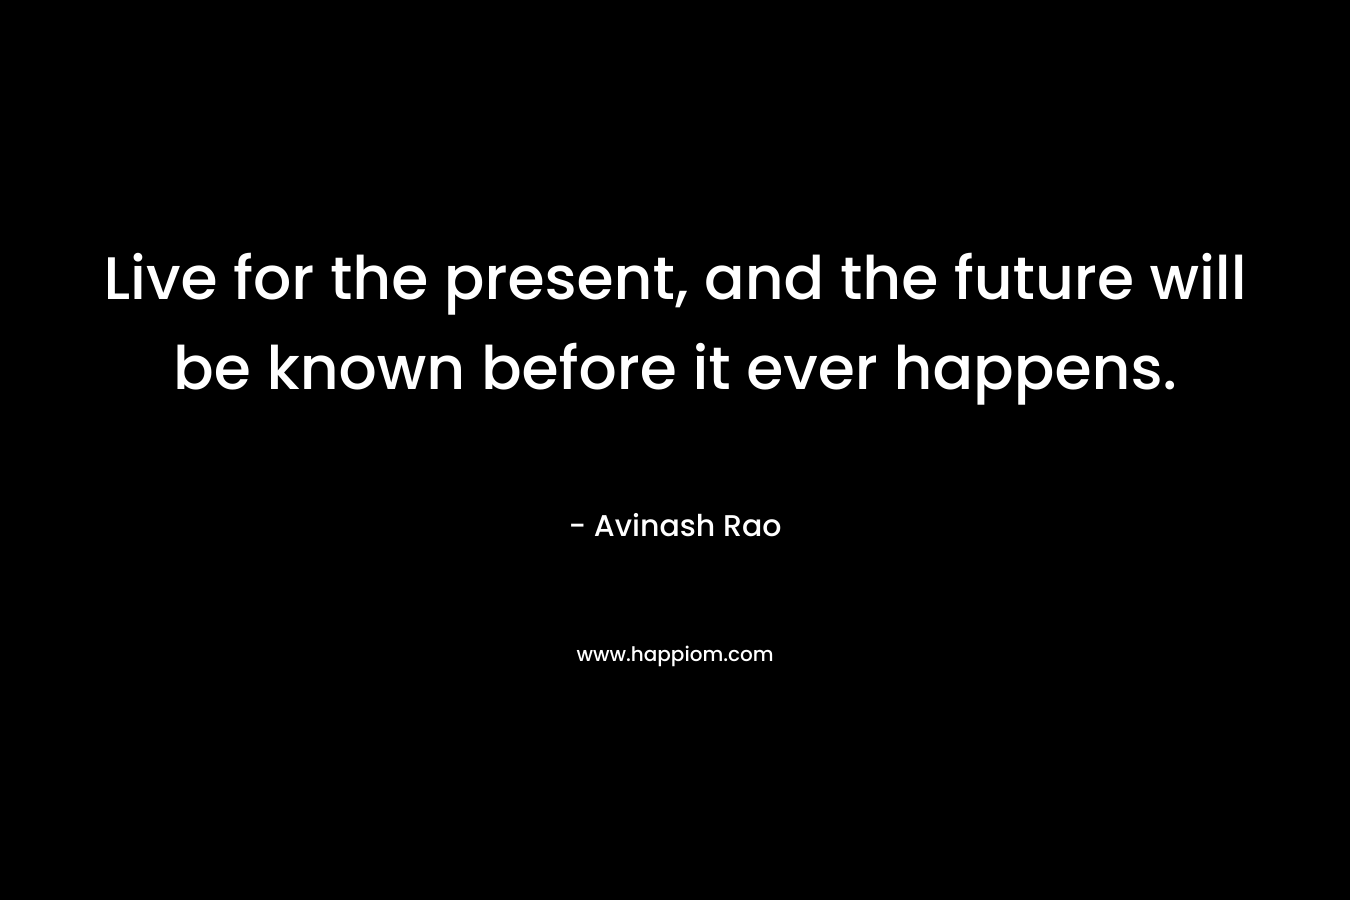 Live for the present, and the future will be known before it ever happens. – Avinash Rao